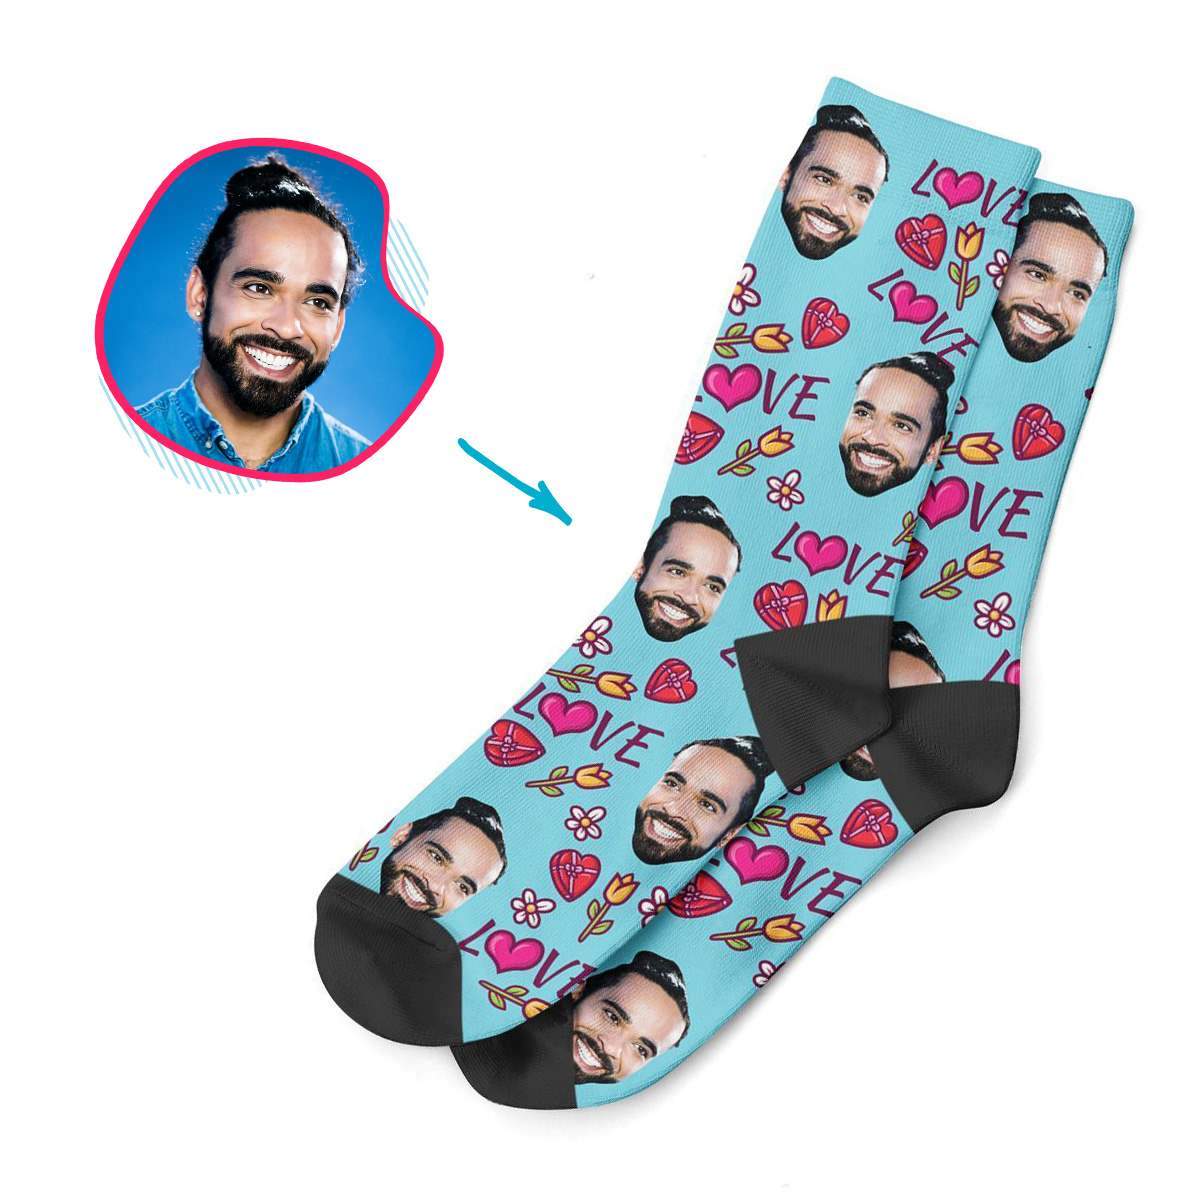 blue Hearts and Flowers socks personalized with photo of face printed on them